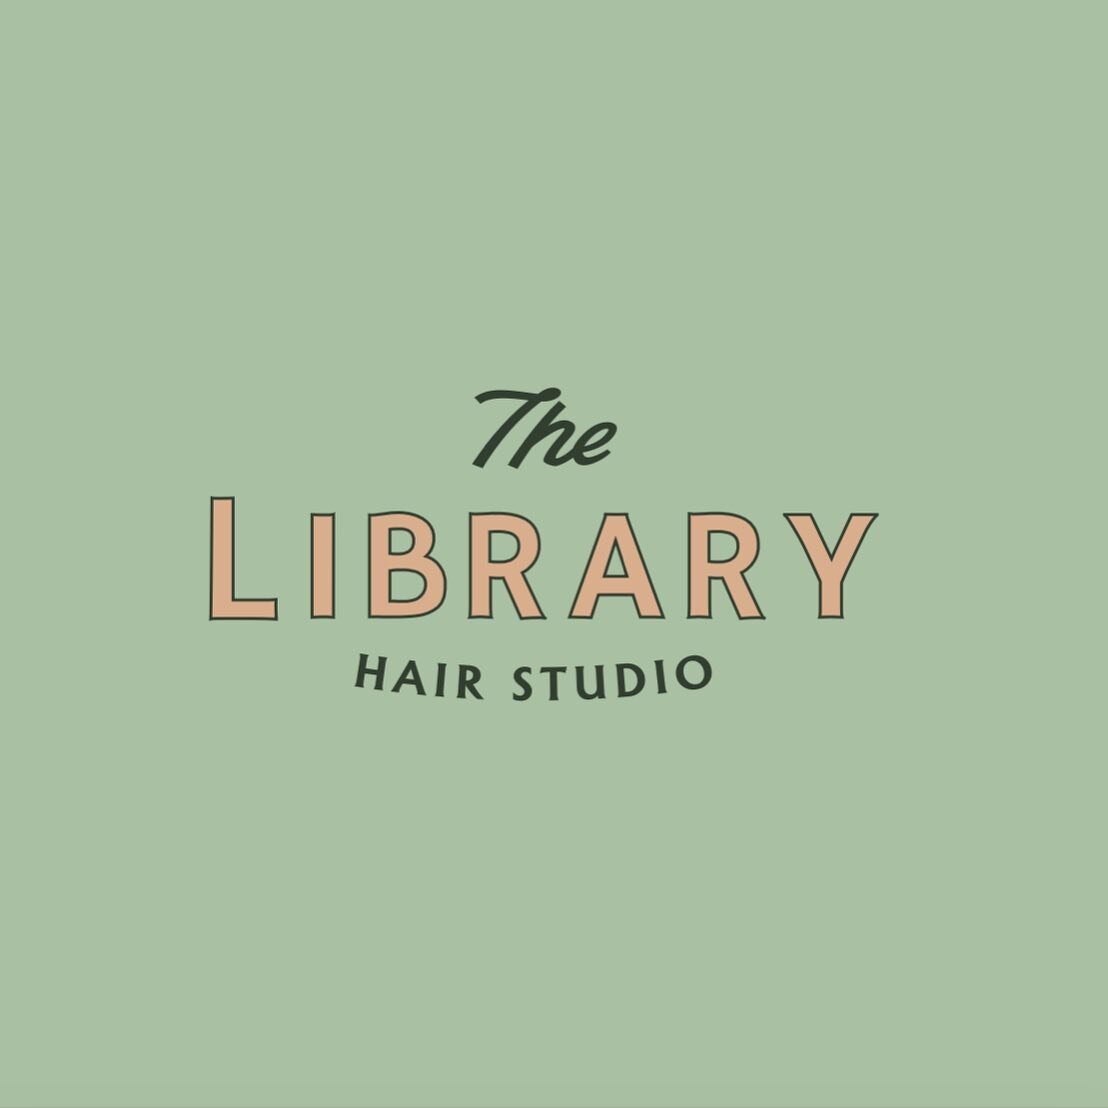 Surprise! For the past few months I have been quietly working on huge project. I opened my very own hair studio! After a ton of late nights, some tears, a bunch of paint, and hardly any sleep @thelibrary.hairstudio is open for Business!!! I will be r